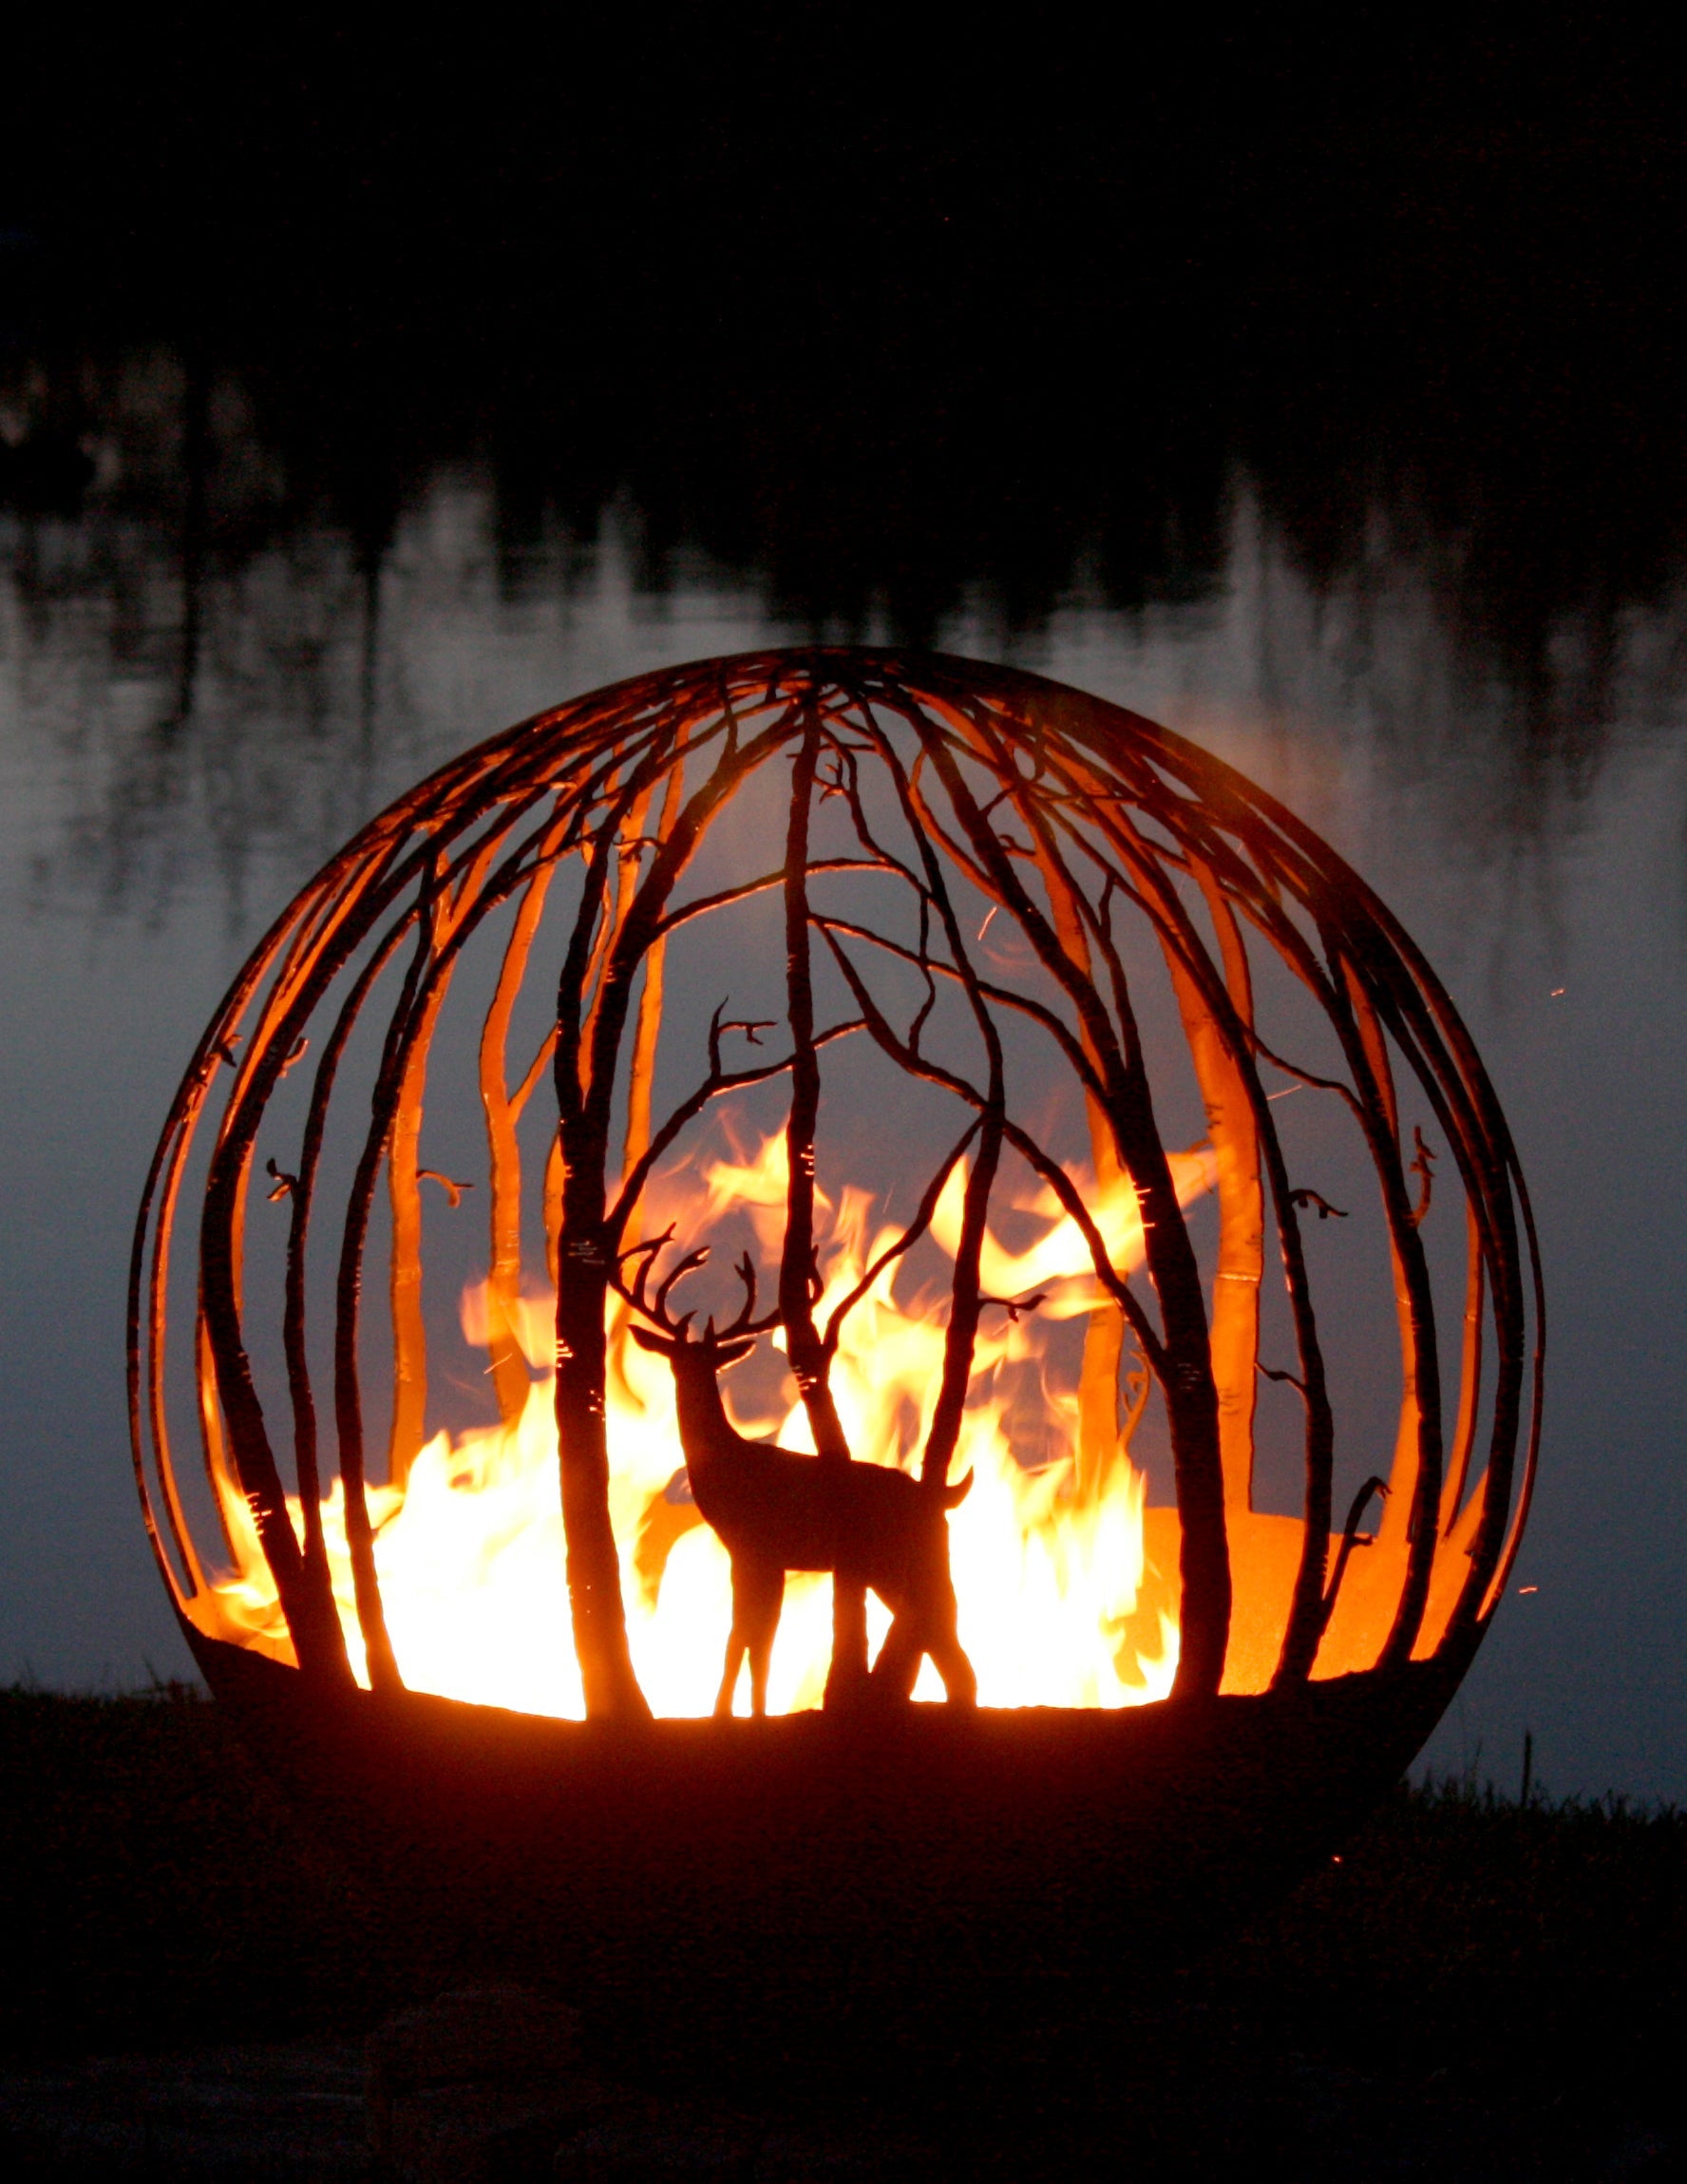 The Fire Pit Gallery Winter Woods Fire Pit Sphere Design Your Own